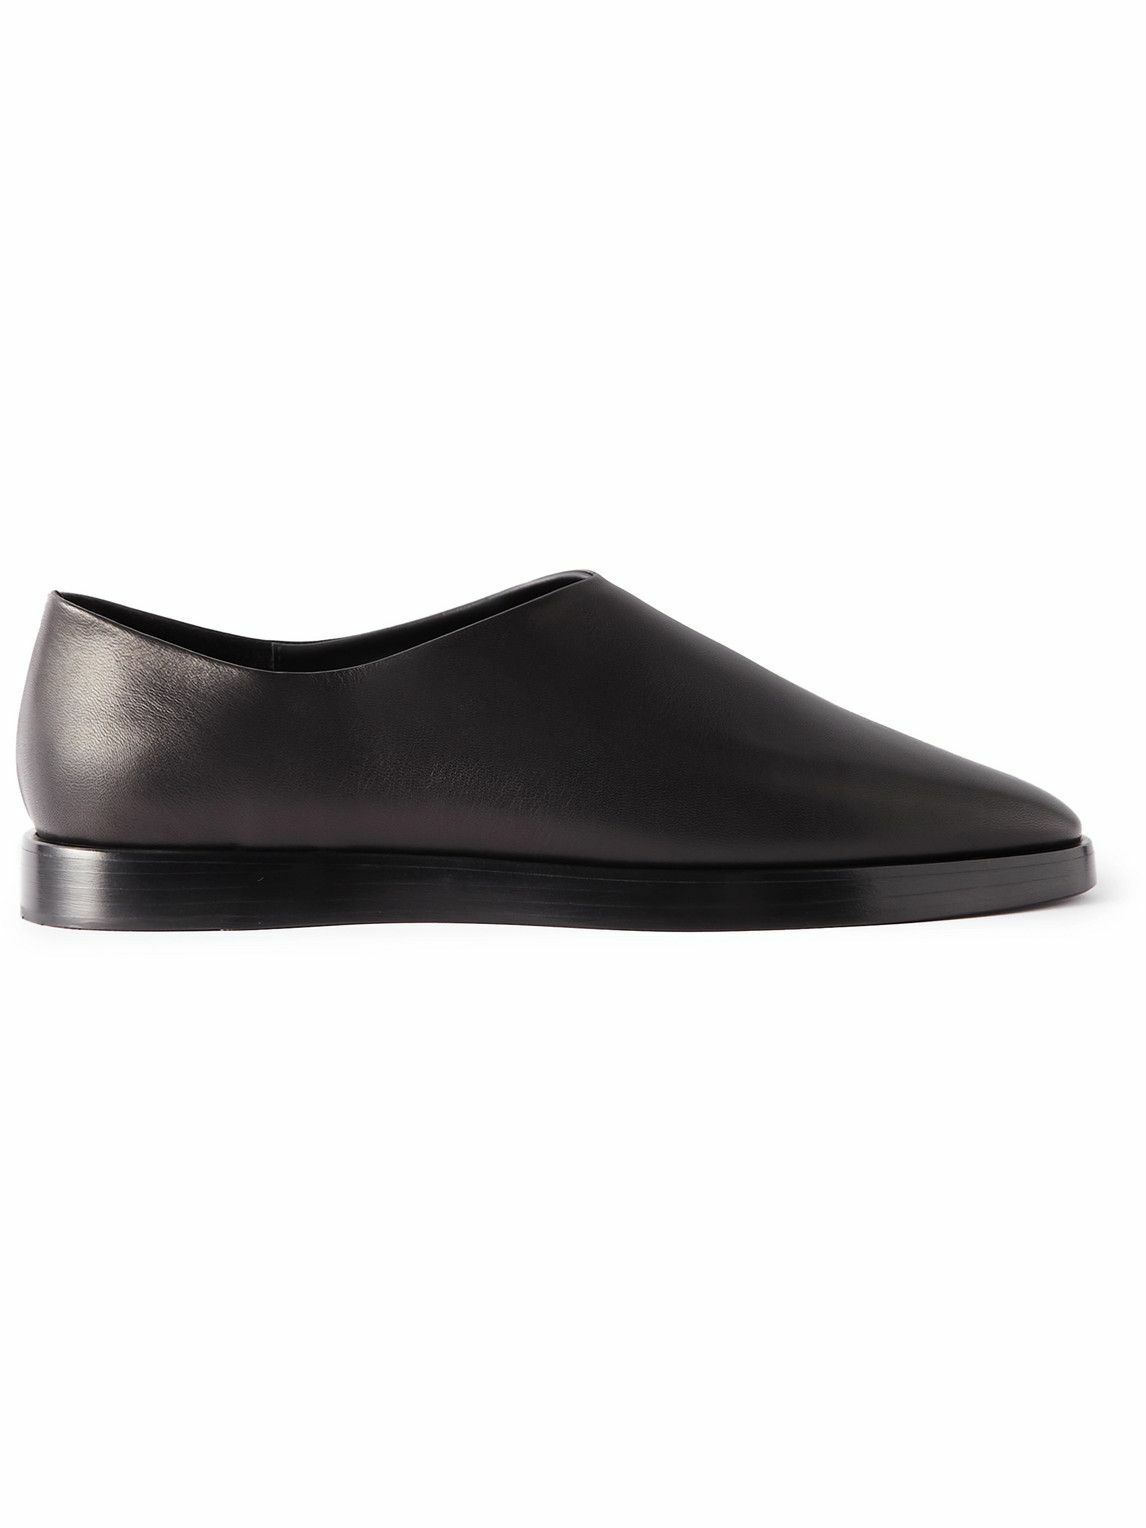 Fear of God - Eternal Collapsible-Heel Leather Loafers - Black Fear Of God